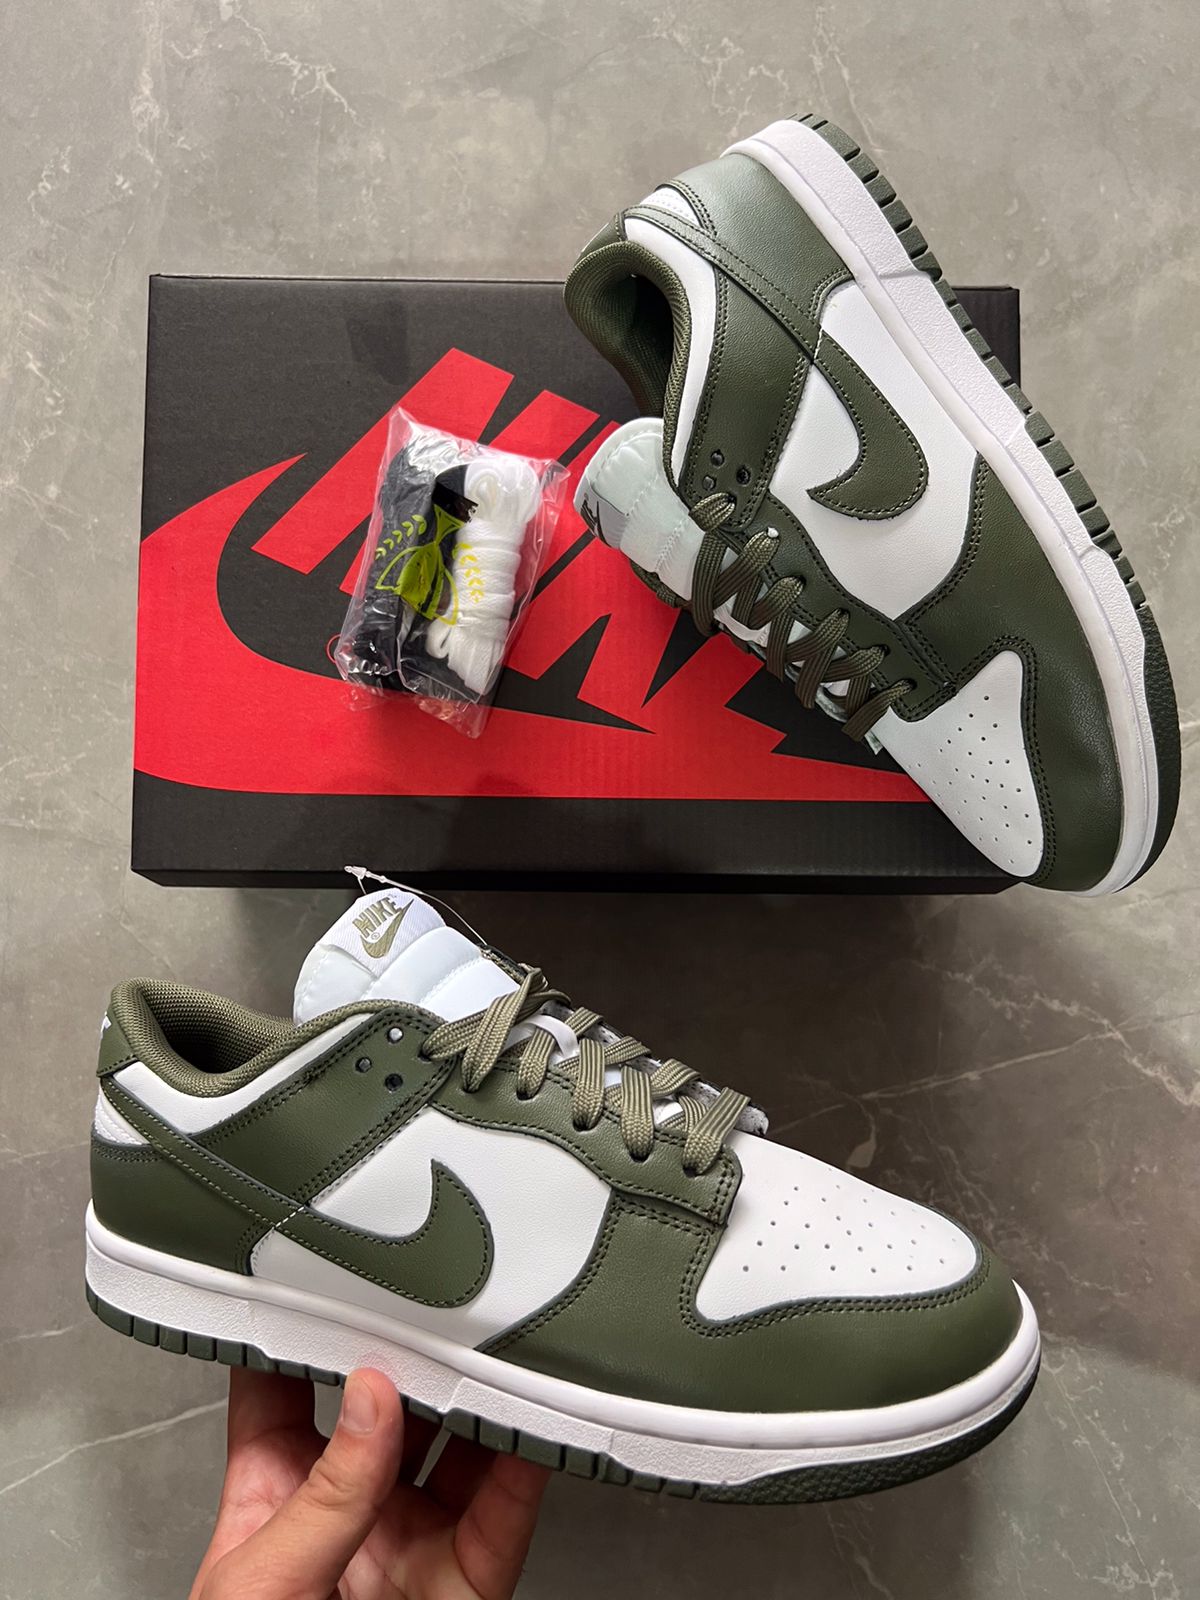 SB Dunk Olive Sneakers in Stock